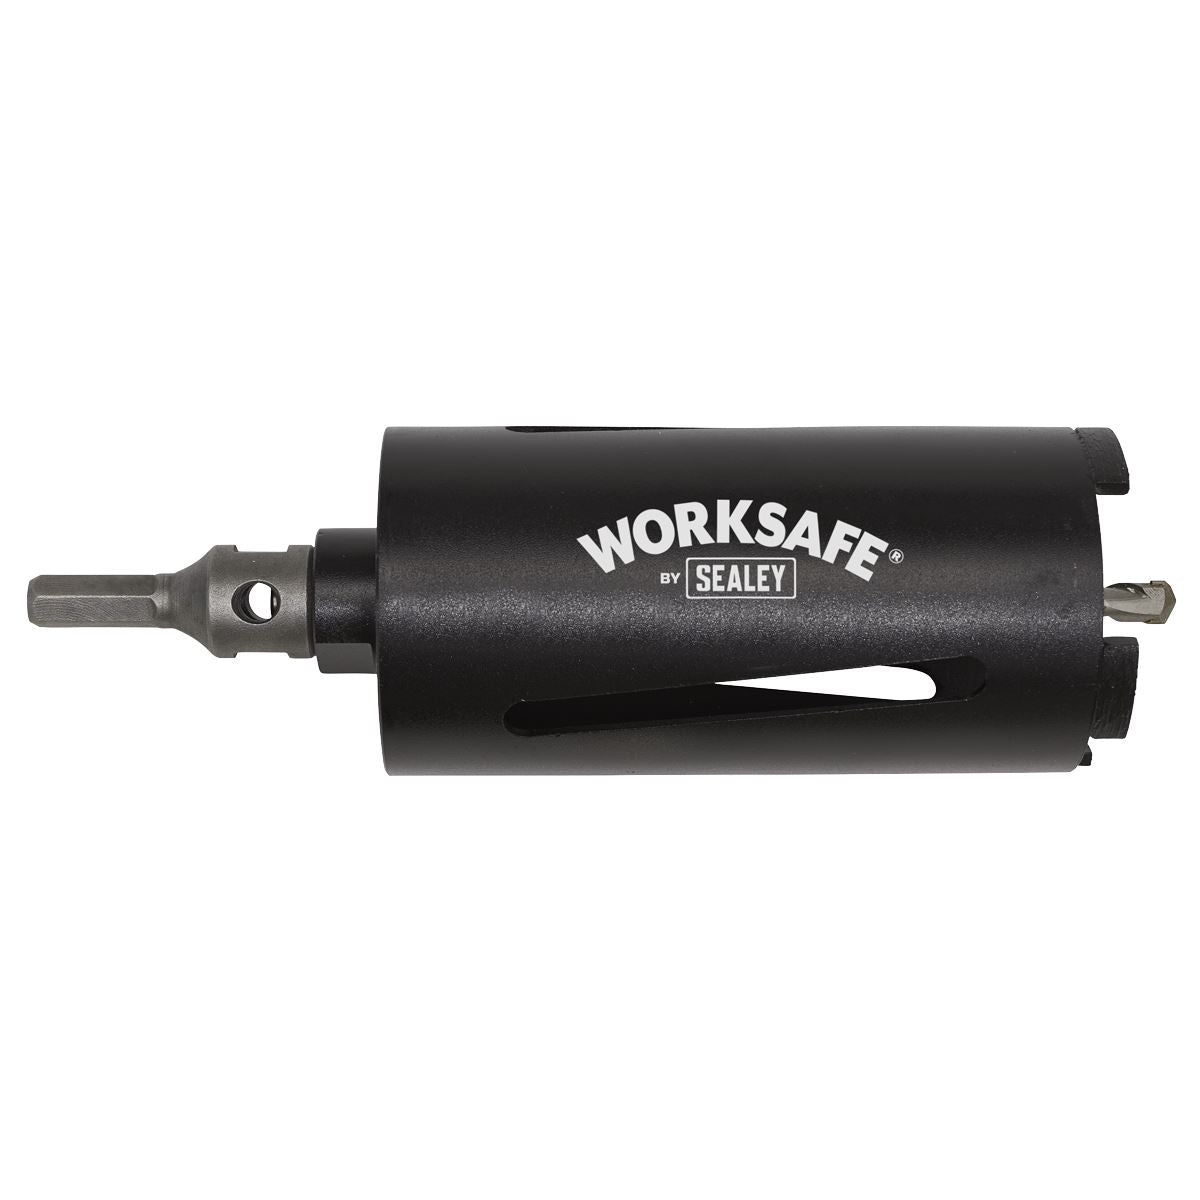 Worksafe by Sealey Core-to-Go Dry Diamond Core Drill Ø78mm x 150mm